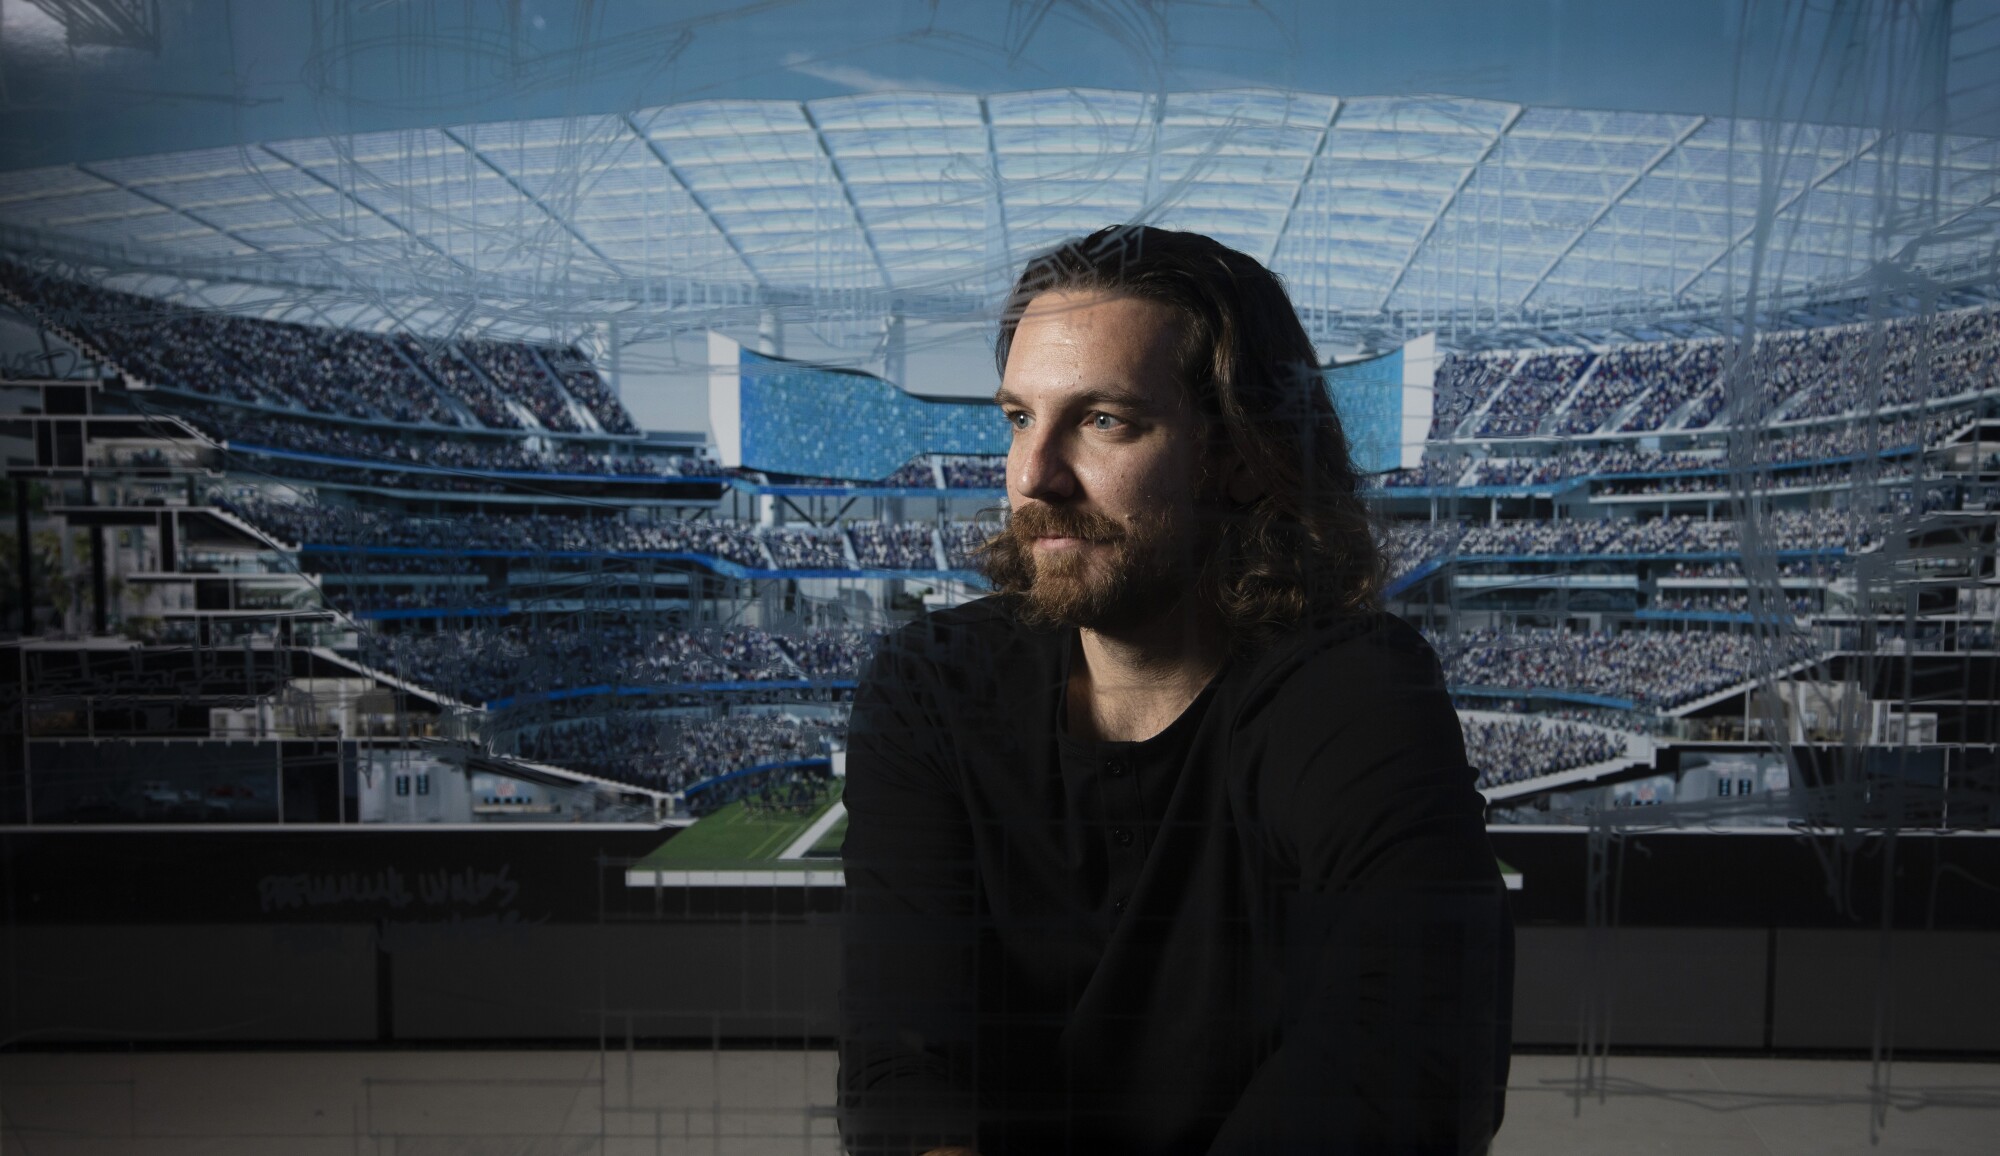 Architect Lance Evans sits before a projection of SoFi Stadium in his firm's Westwood office.